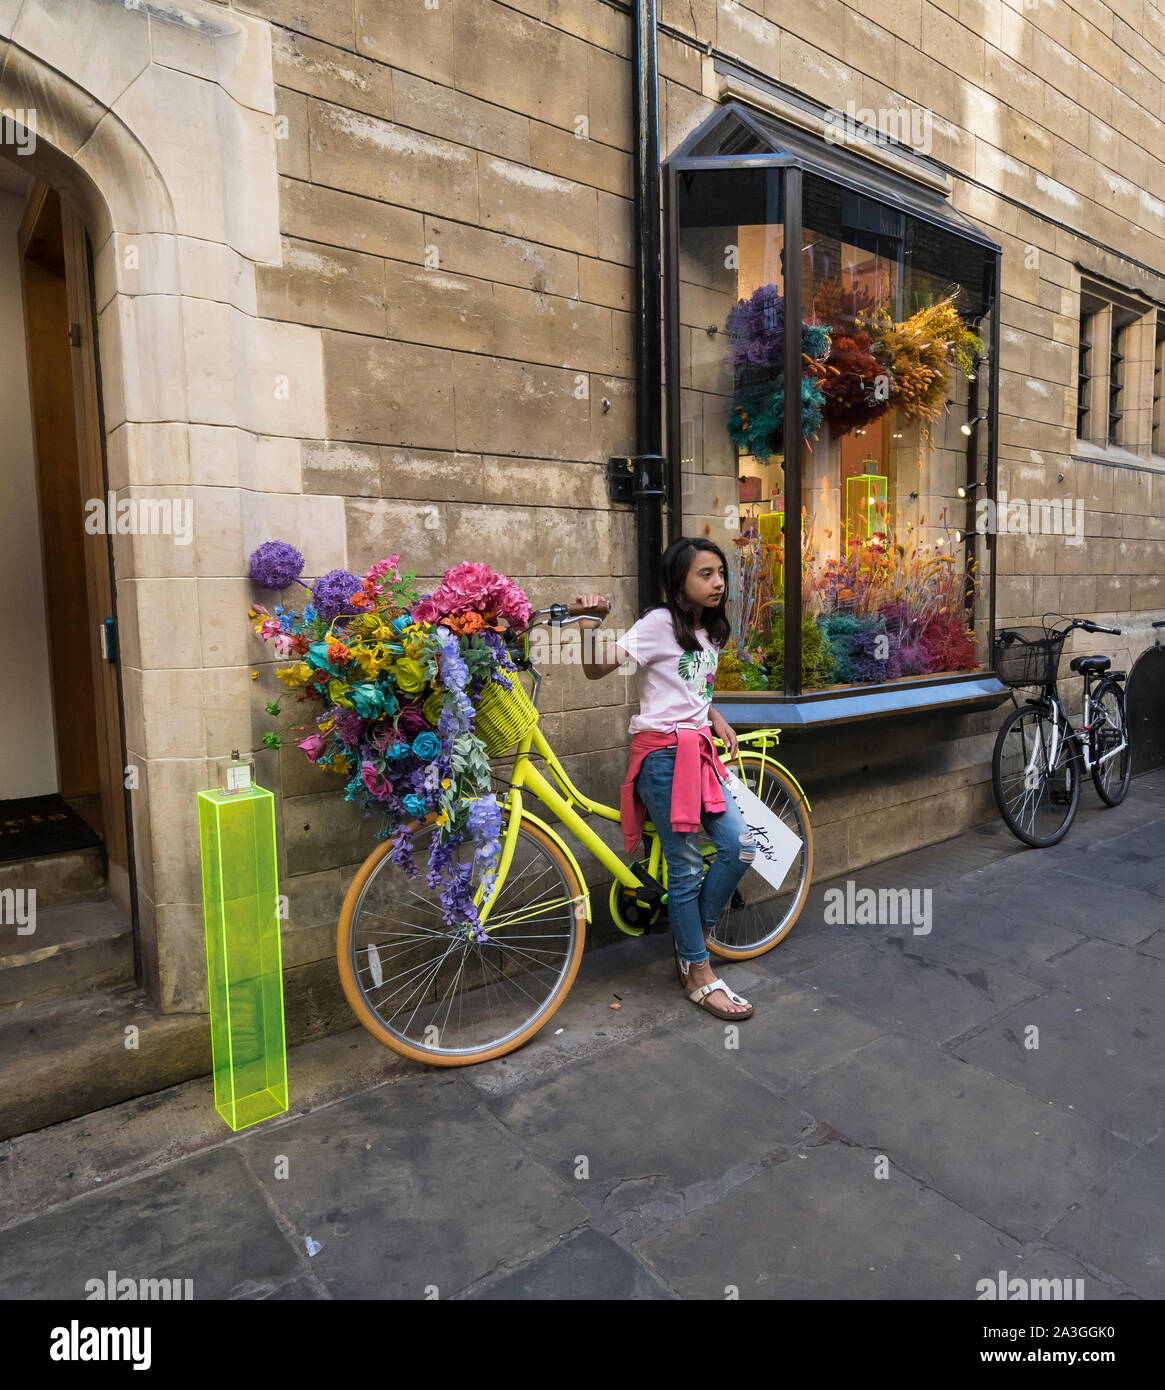 Young girl posing for photo by advertisement bike Cambridge 2019 Stock Photo